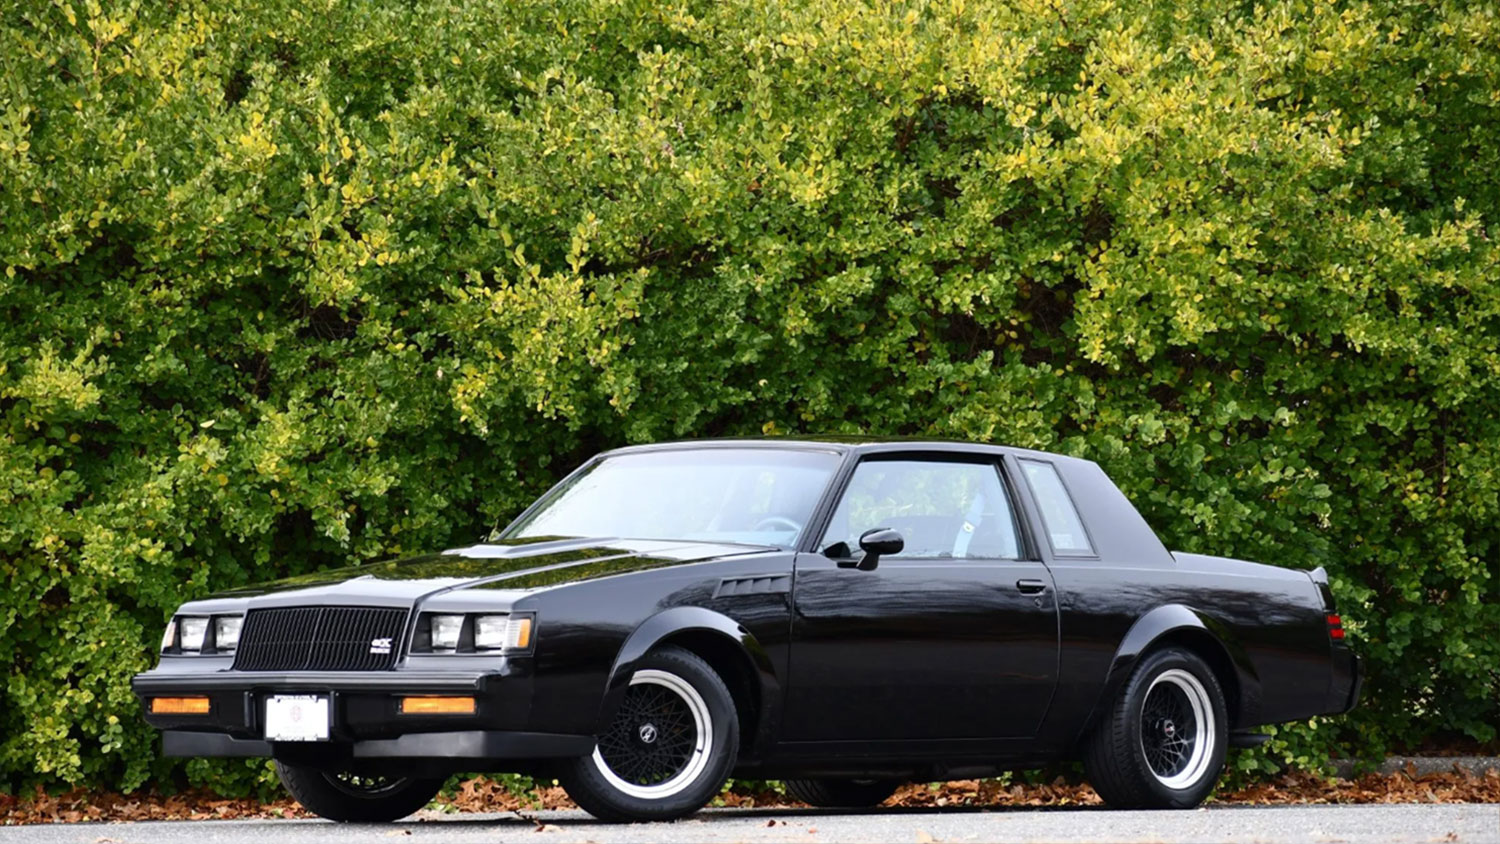 766-Mile 1987 Buick GNX Up For Auction Online